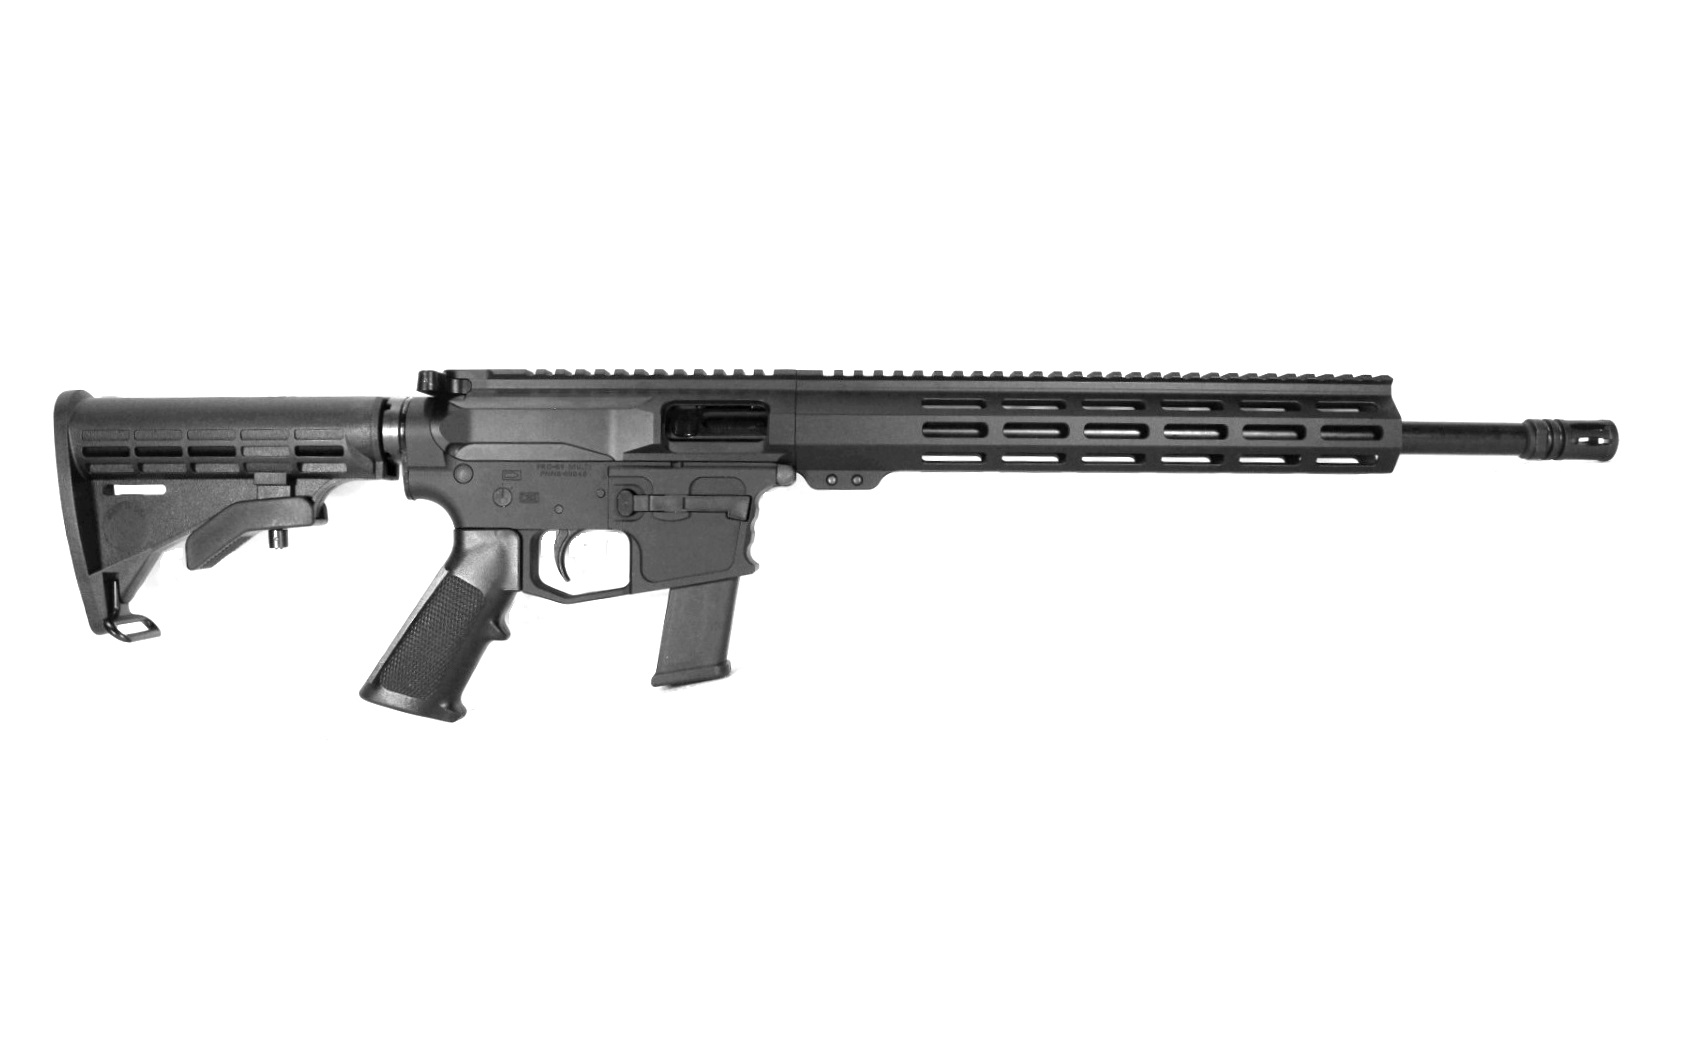 16 inch 10mm AR-15 Rifle | In Stock | Fast Shipping